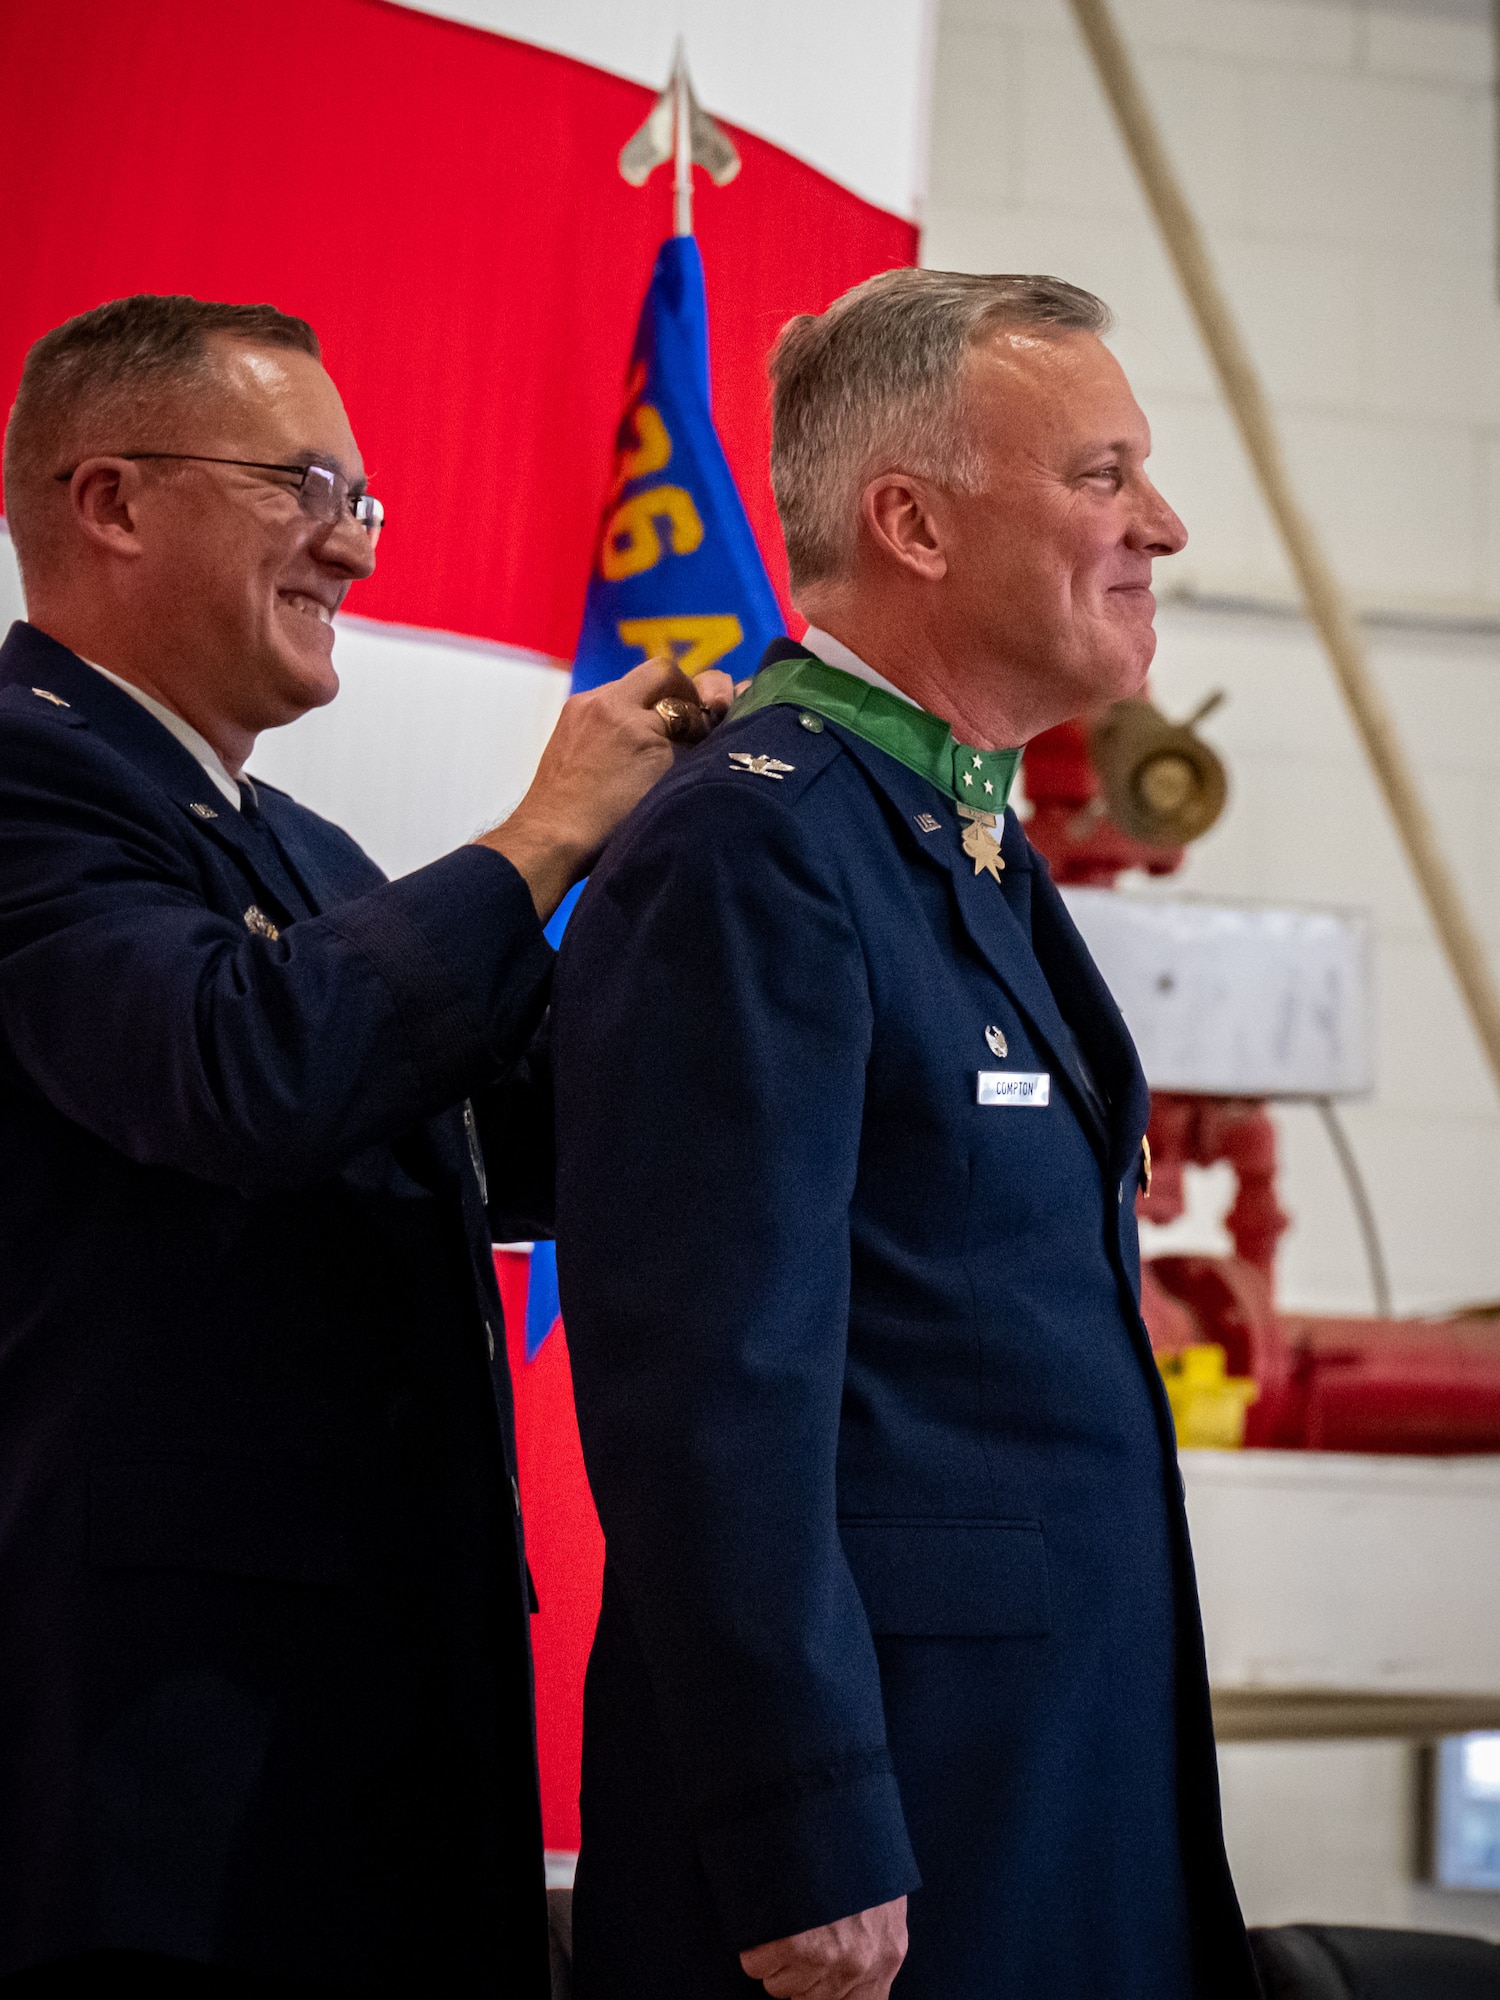 General fastens a medal around the neck of a retiring officer.